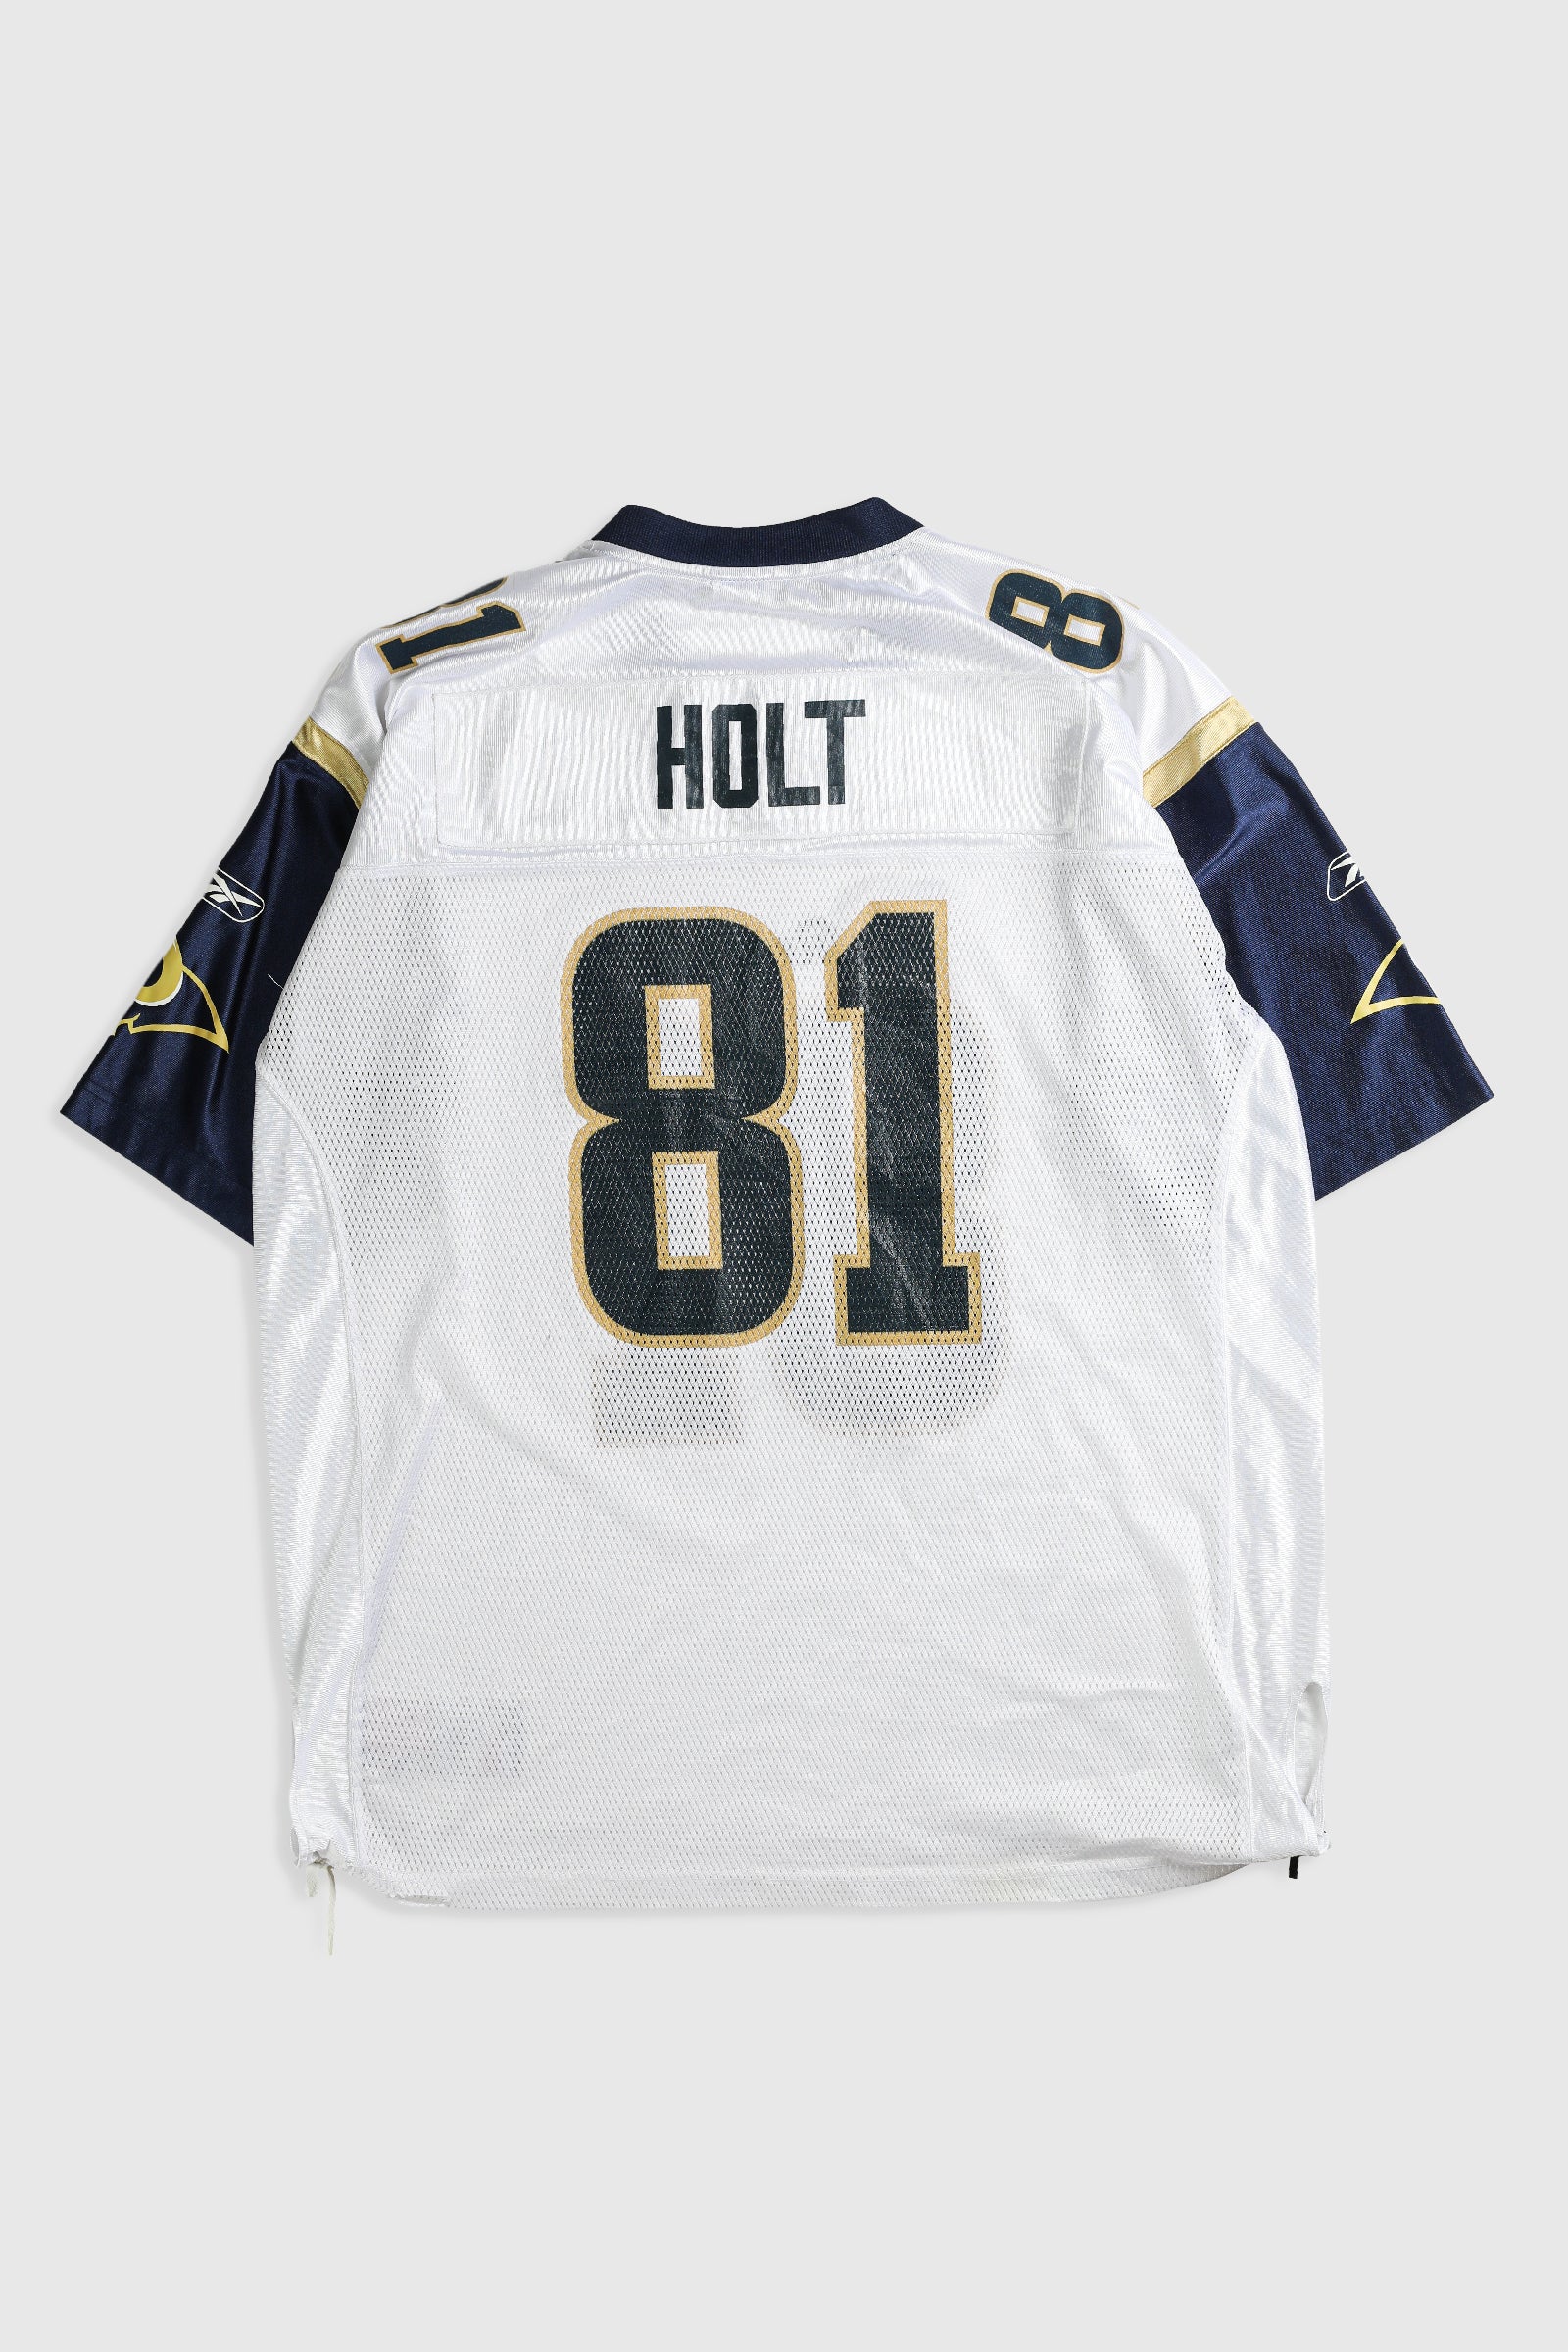 Vintage Rams NFL Jersey - XL – Frankie Collective